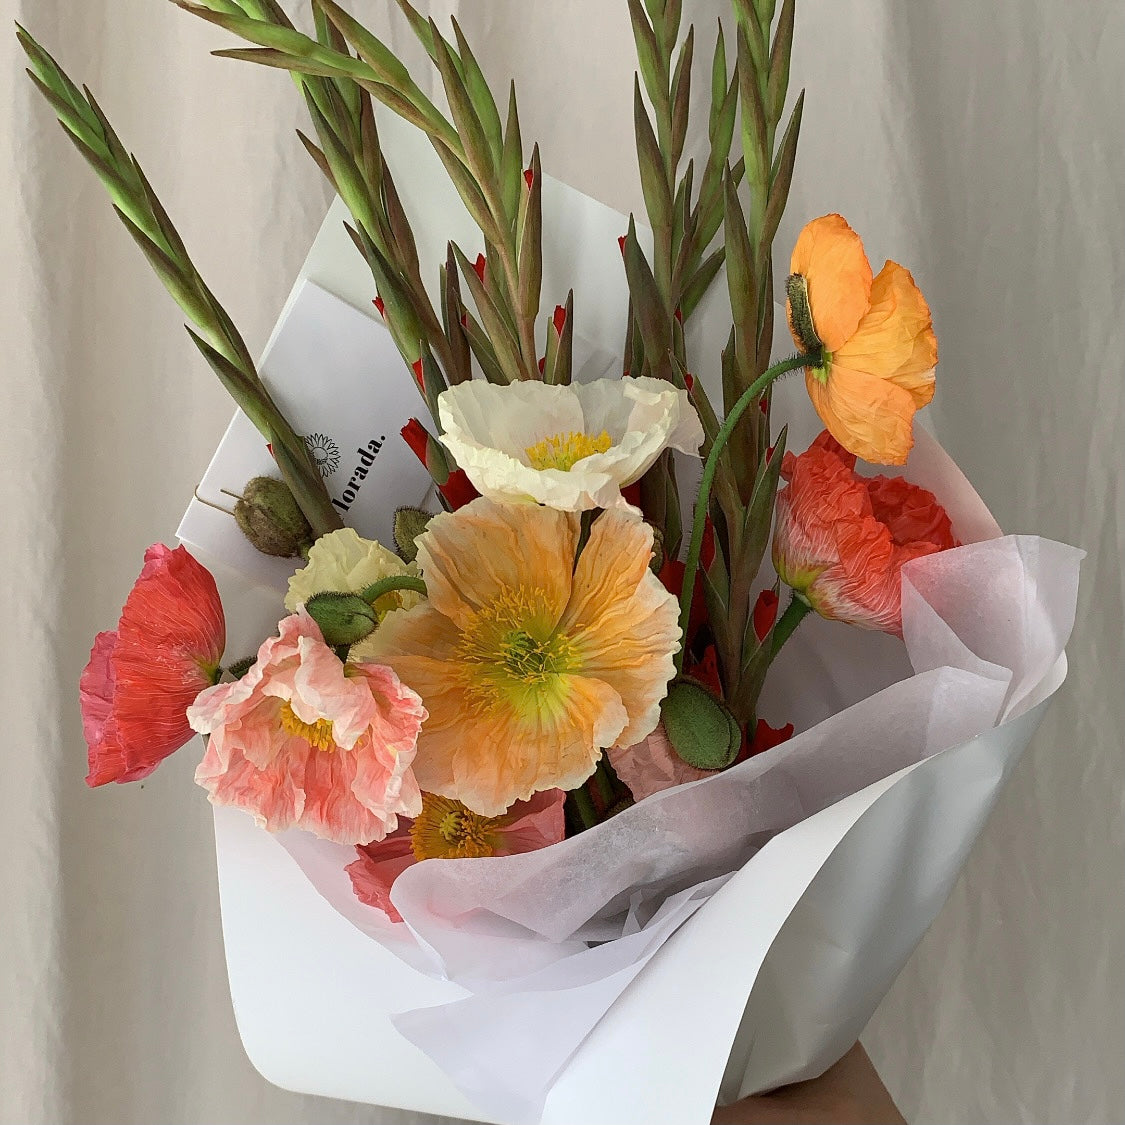 Posie of colourful poppies and mini gladioli wrapped in Florada gift wrap.